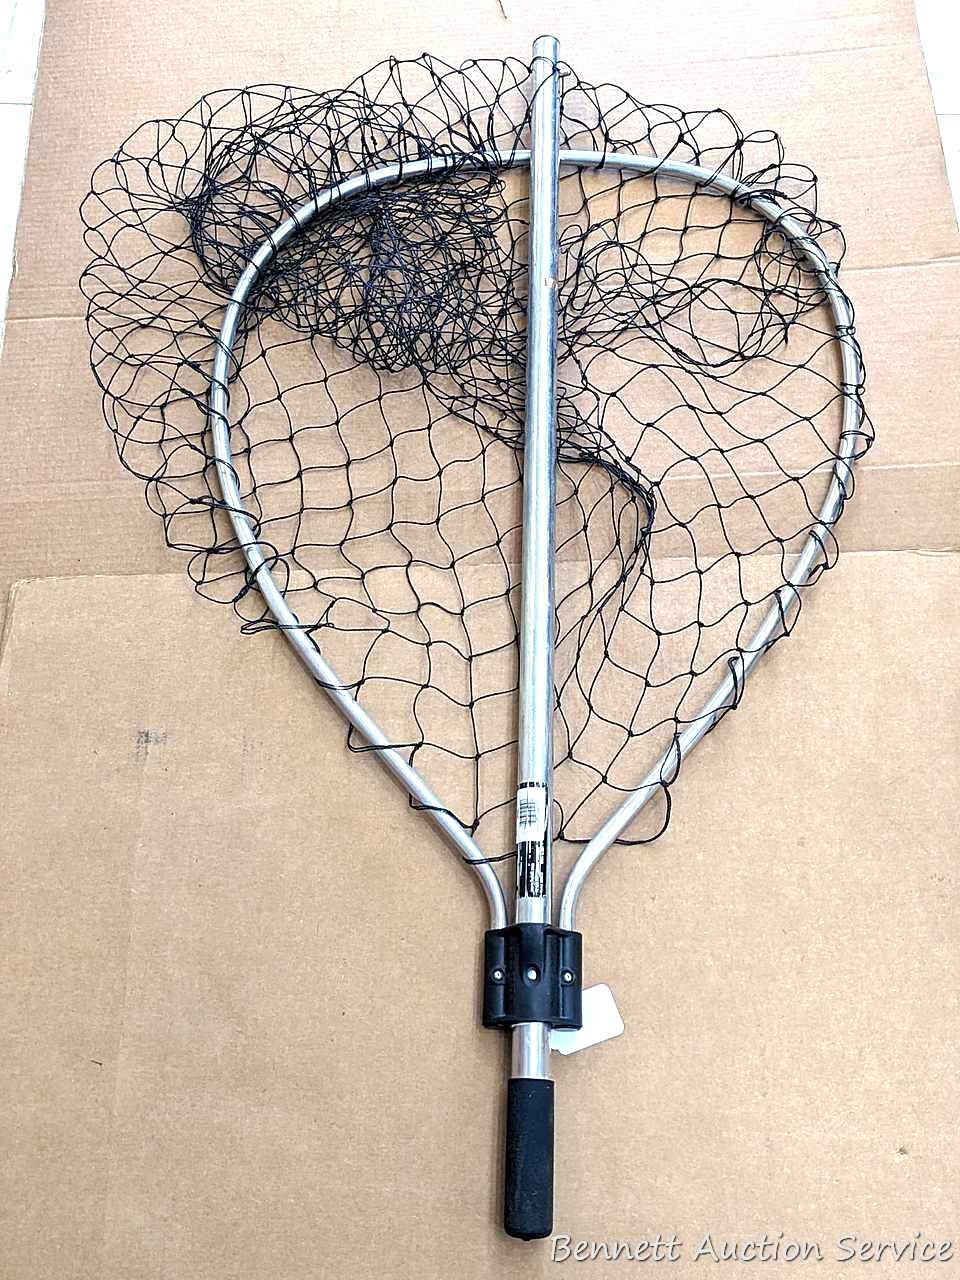 Frabill adjustable fishing net extends to nearly